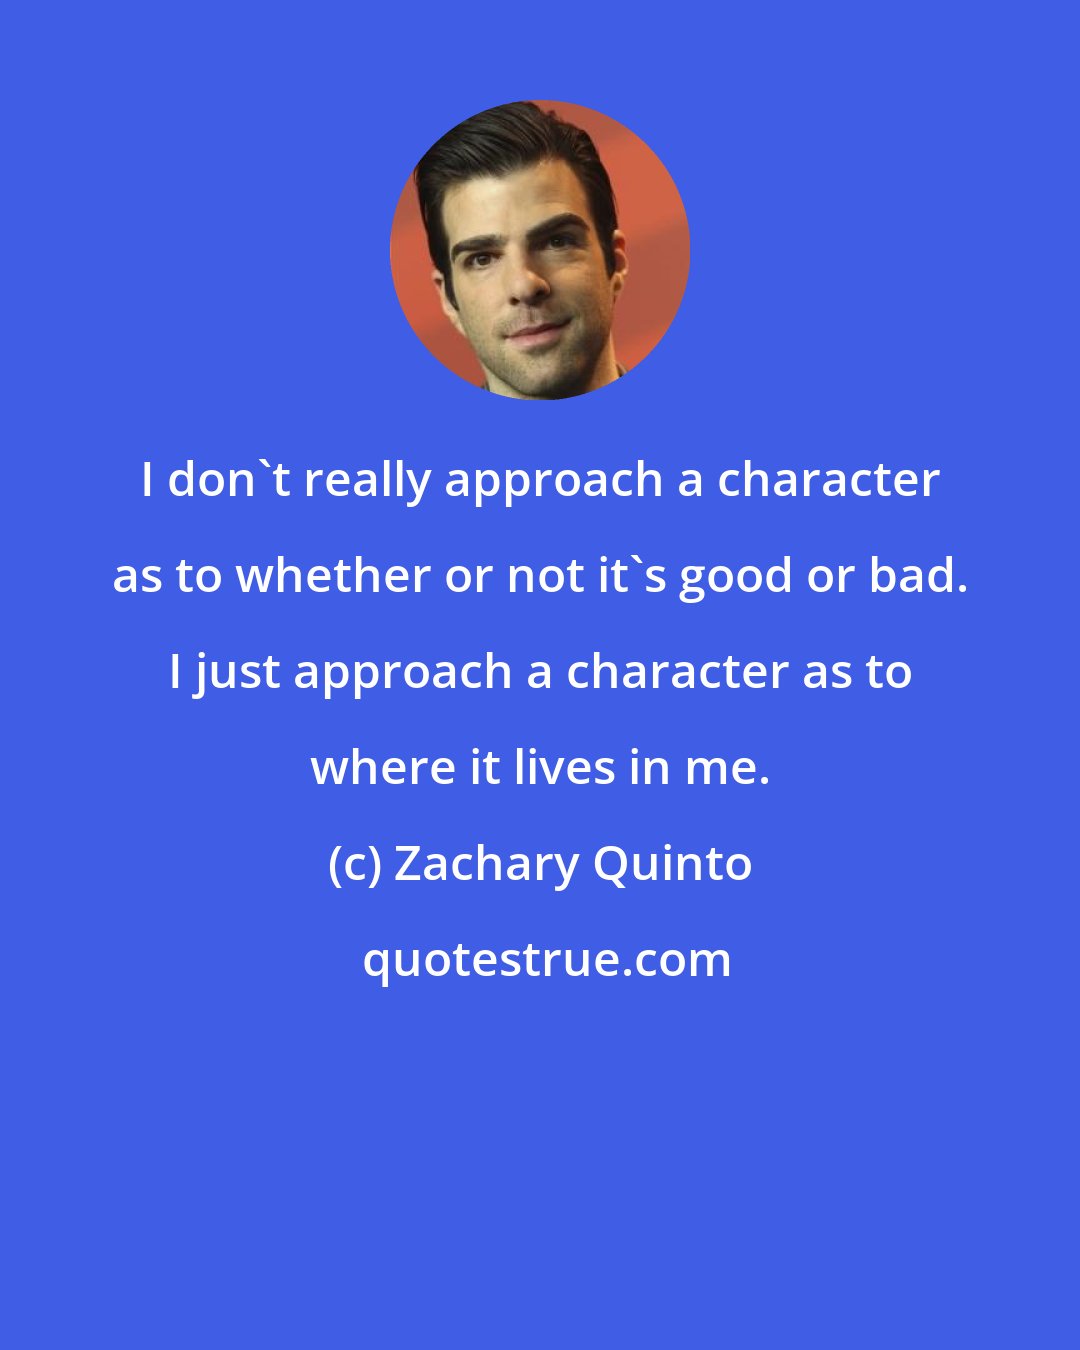 Zachary Quinto: I don't really approach a character as to whether or not it's good or bad. I just approach a character as to where it lives in me.